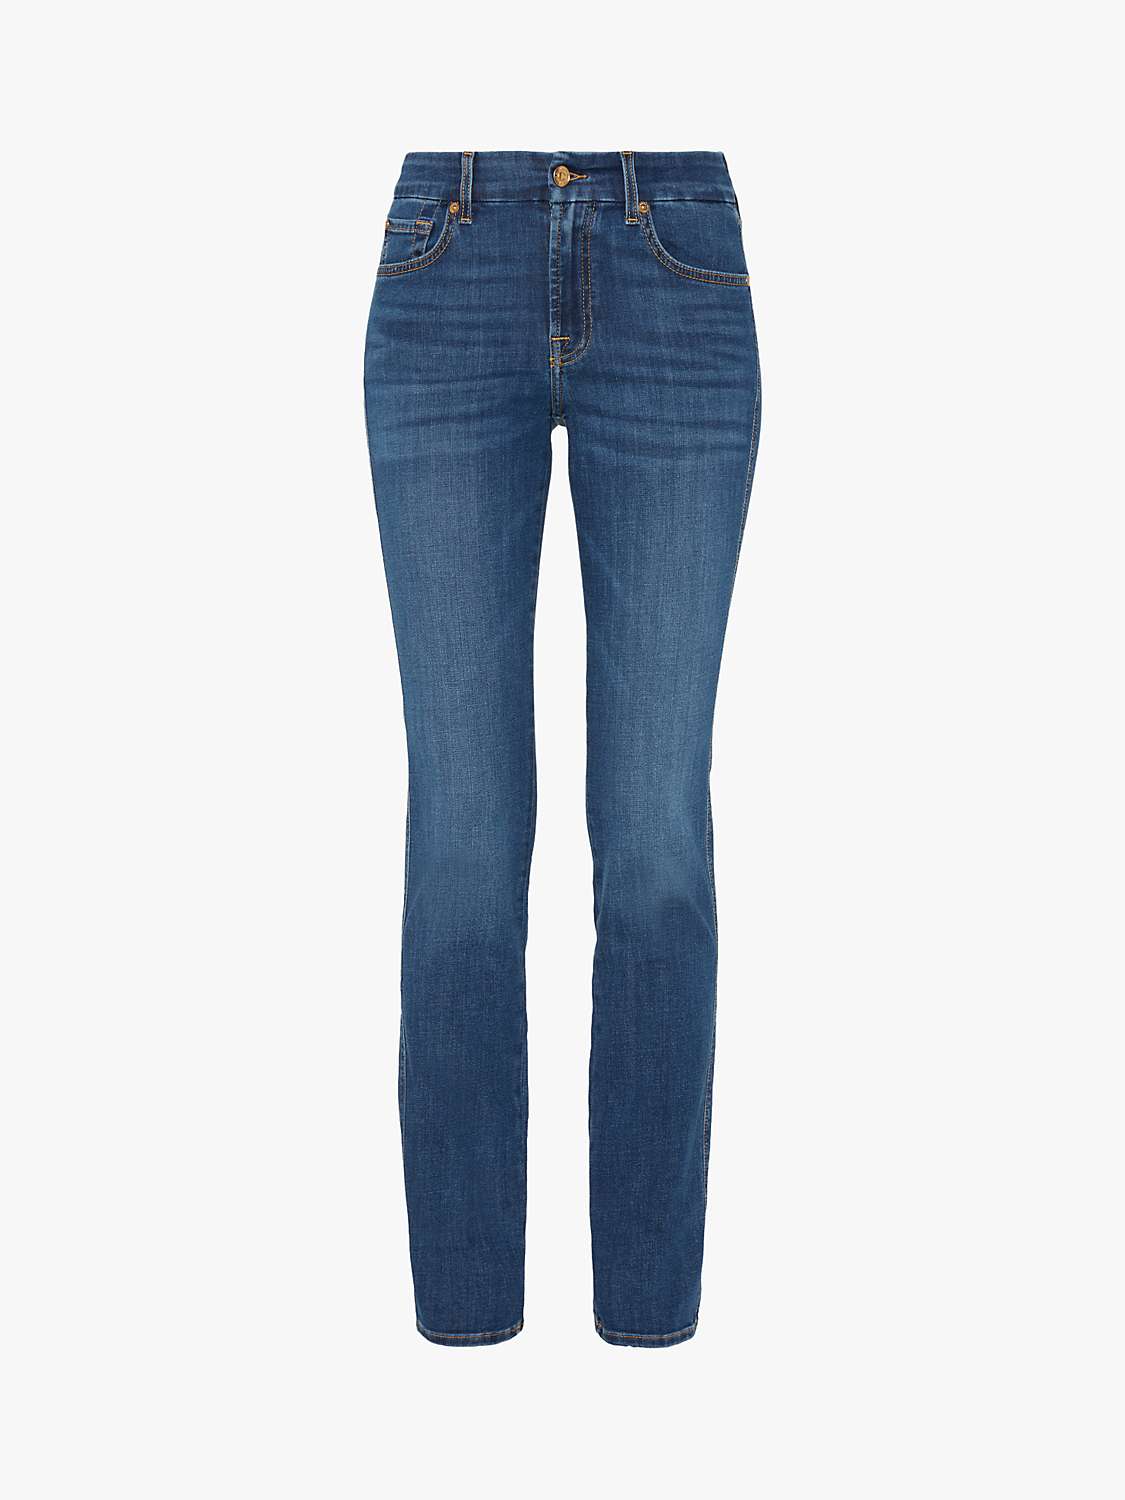 Buy 7 For All Mankind Kimmie B(Air) Jeans, Duchess Online at johnlewis.com